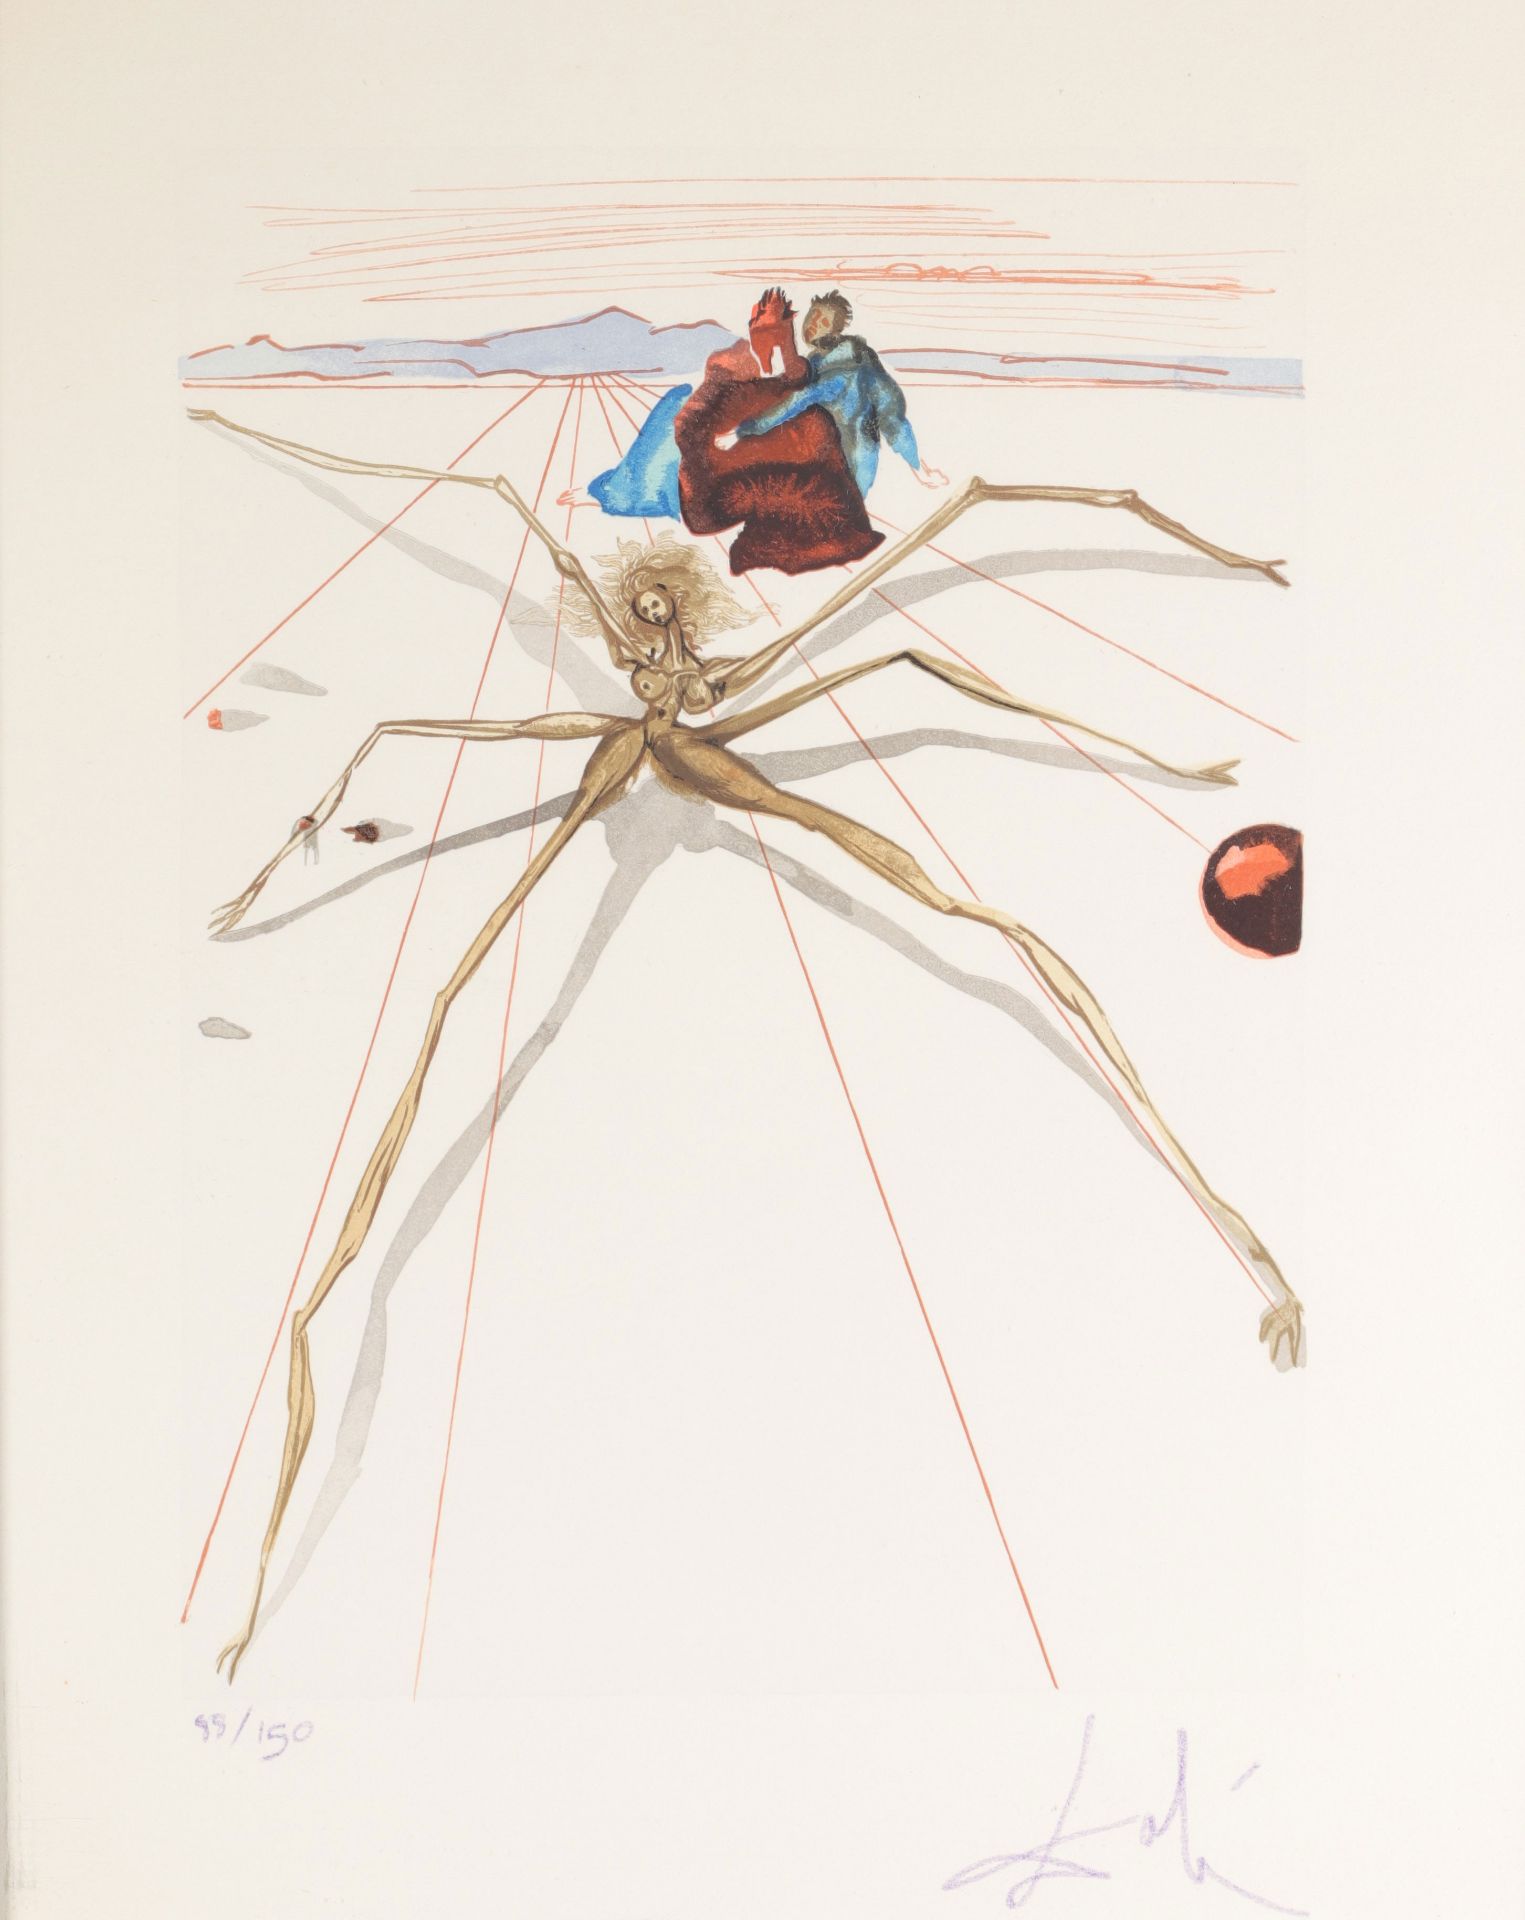 Salvador Dali. "Leaving the ledge of wrath." The Divine Comedy. Purgatory - Song 12. 1963.